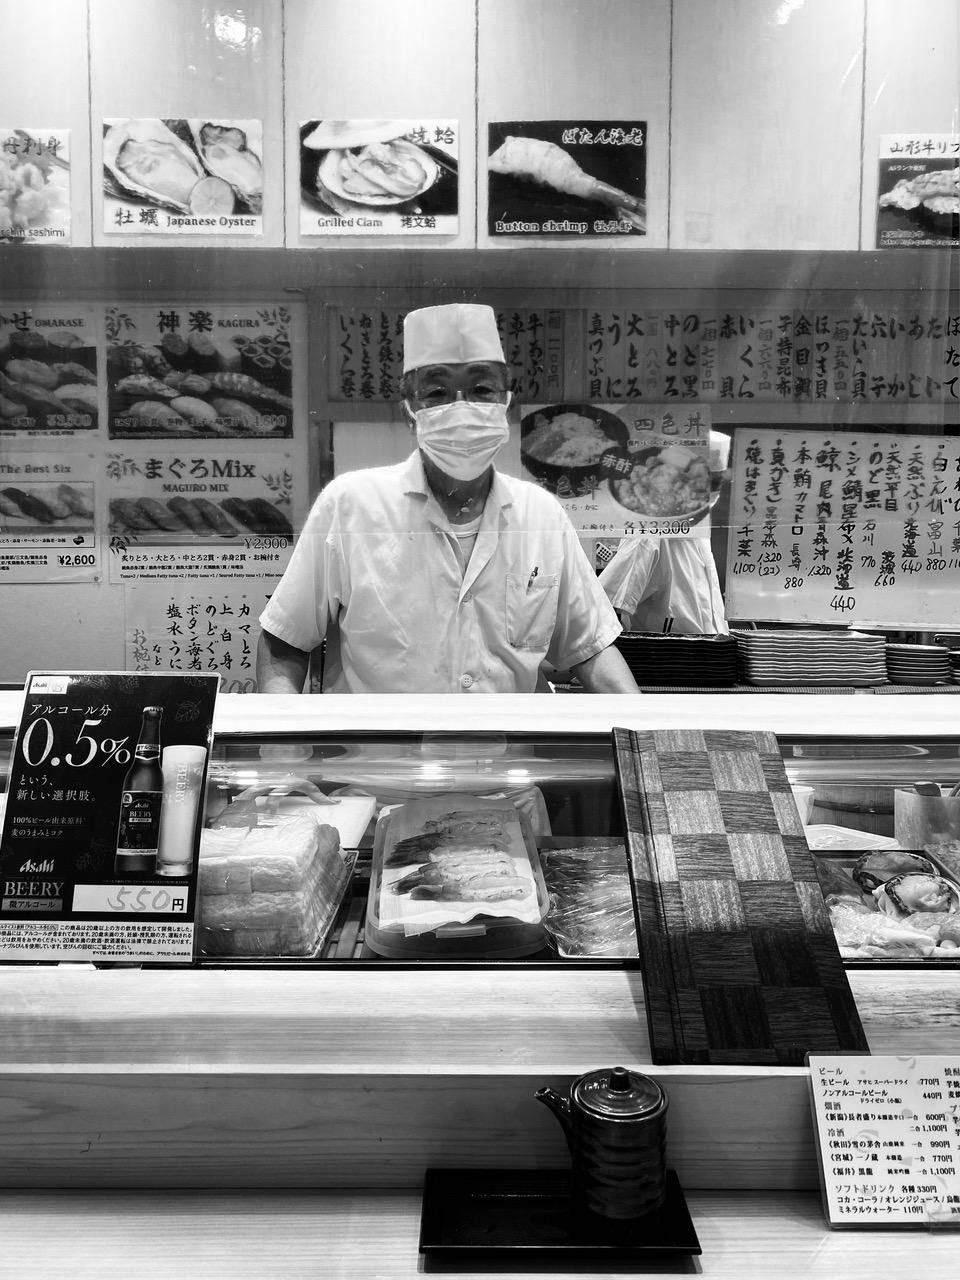 Limited Edition #01/10 Black & White portrait of a Sushi Chef in Tokyo October 2022 by Taco Joustra.
This portrait is part of a series titled 